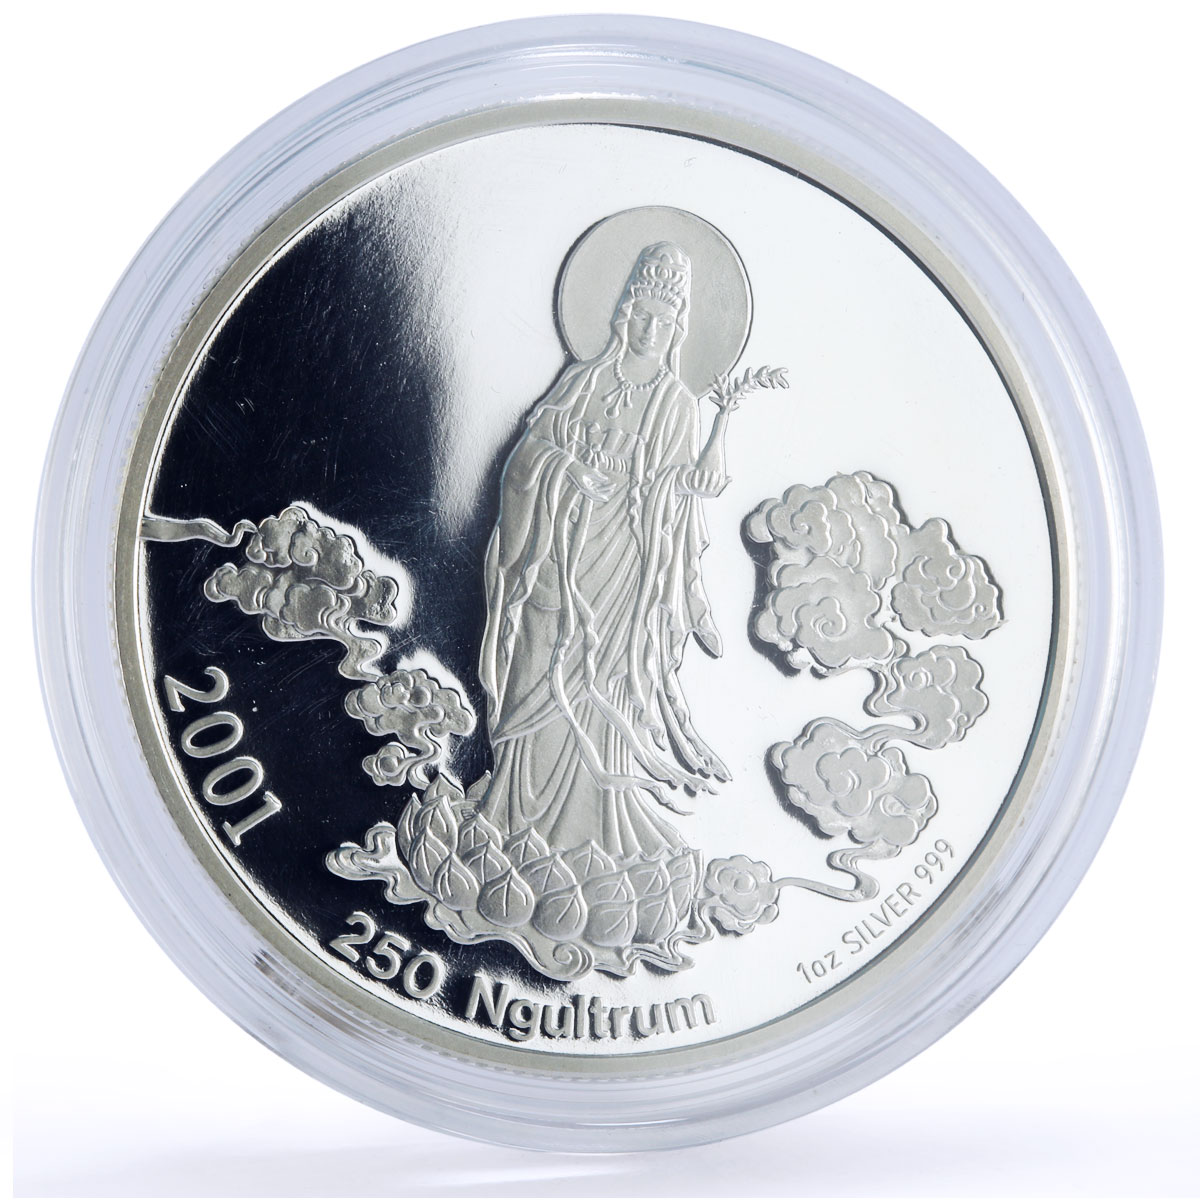 Bhutan 250 ngultrums Religion Buddhism Goddess Guanyin proof silver coin 2001